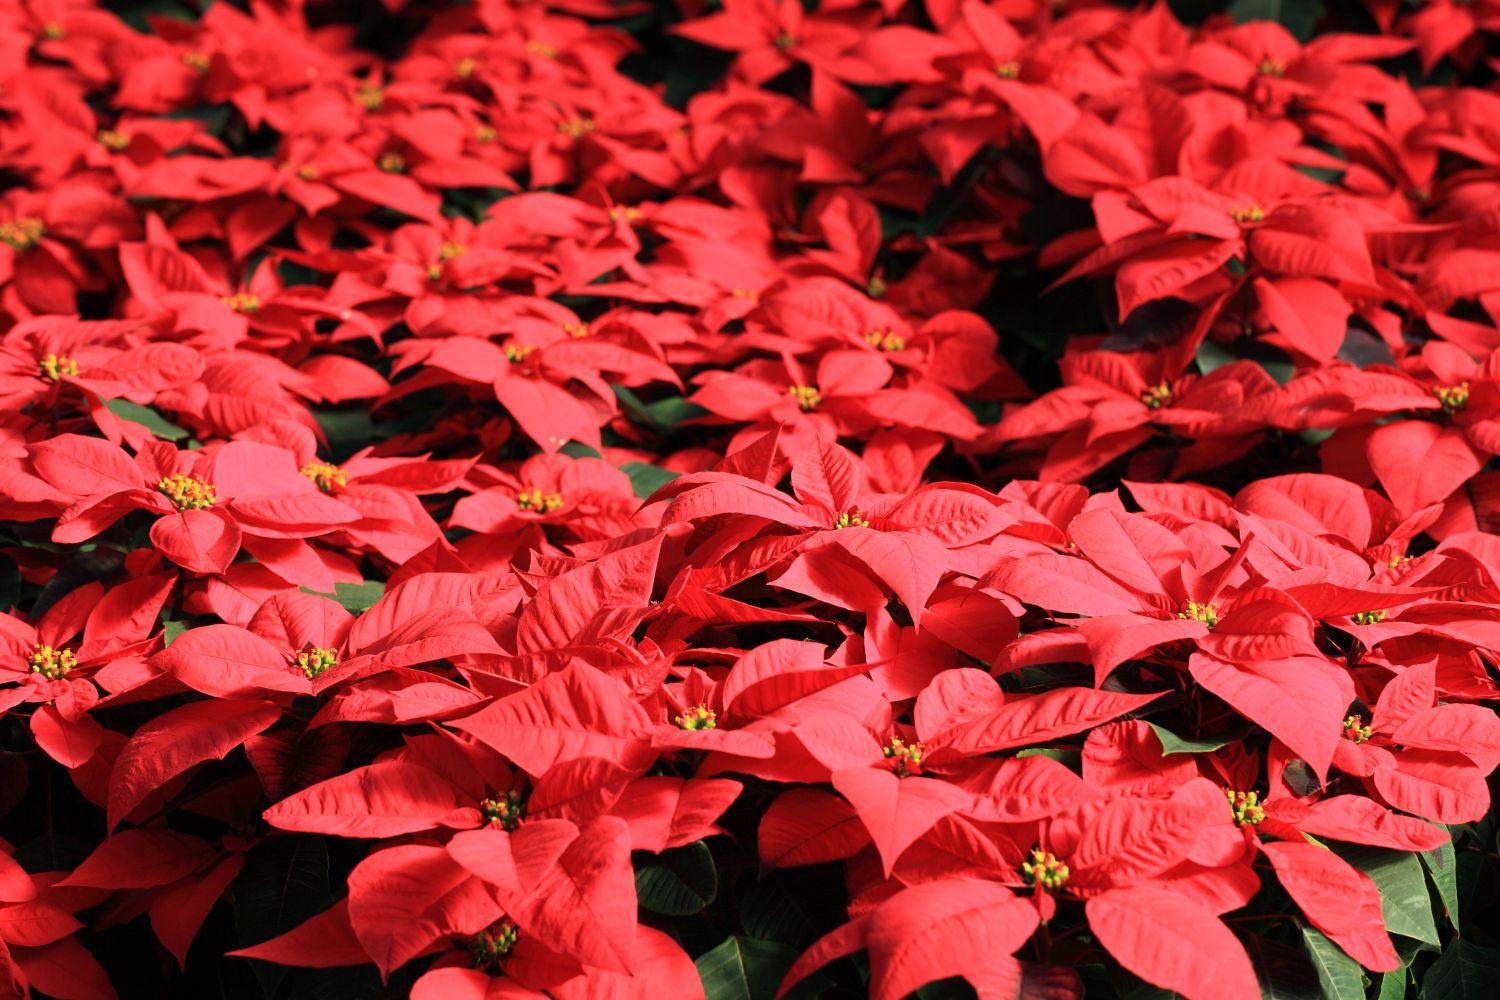 fun facts you may not know about poinsettias